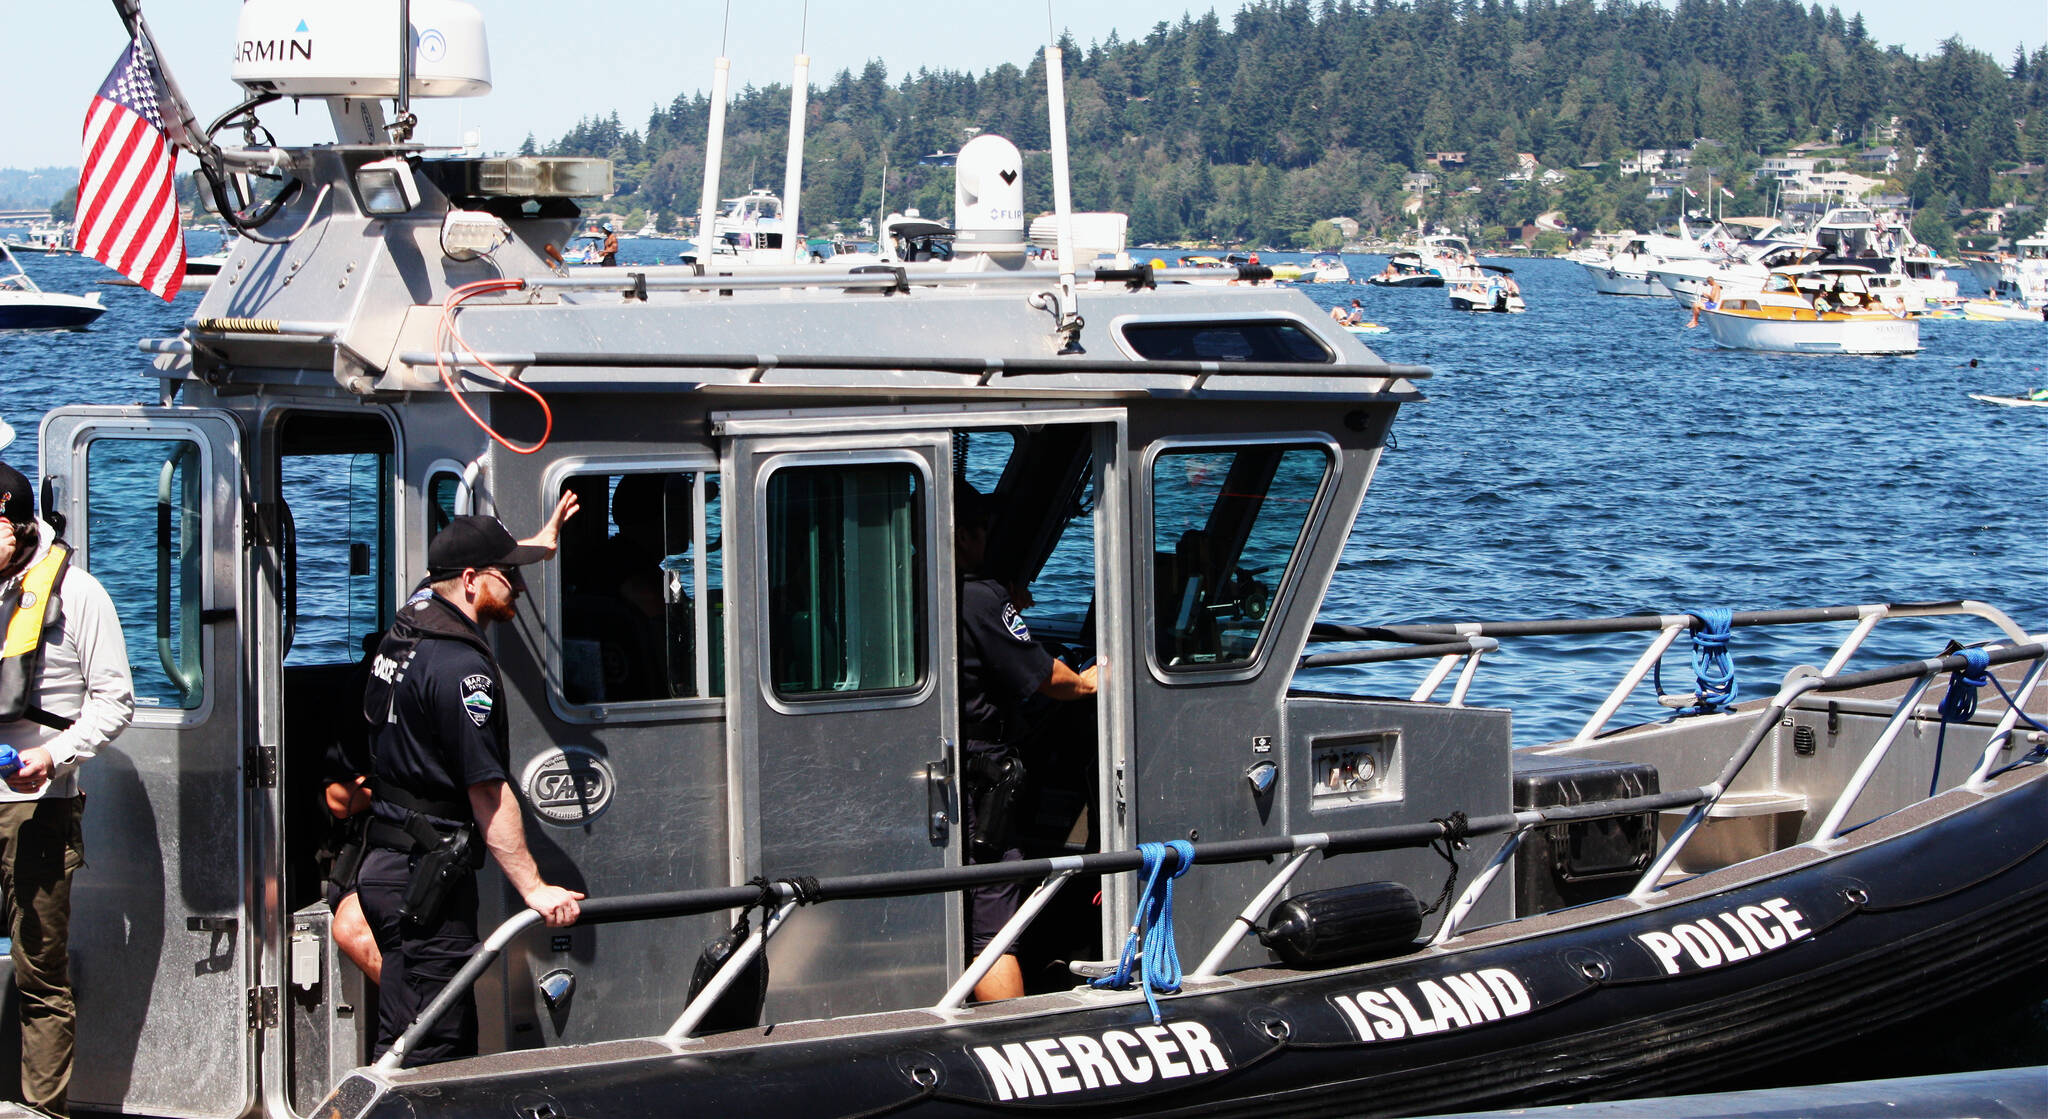 Mercer Island Police Department Marine Patrol officers will offer life jacket fittings and boater safety tips from 2-5 p.m. on May 20 at Mercerdale Park. Here, officers patrol Lake Washington during Seafair on Aug. 7, 2022. Reporter file photo